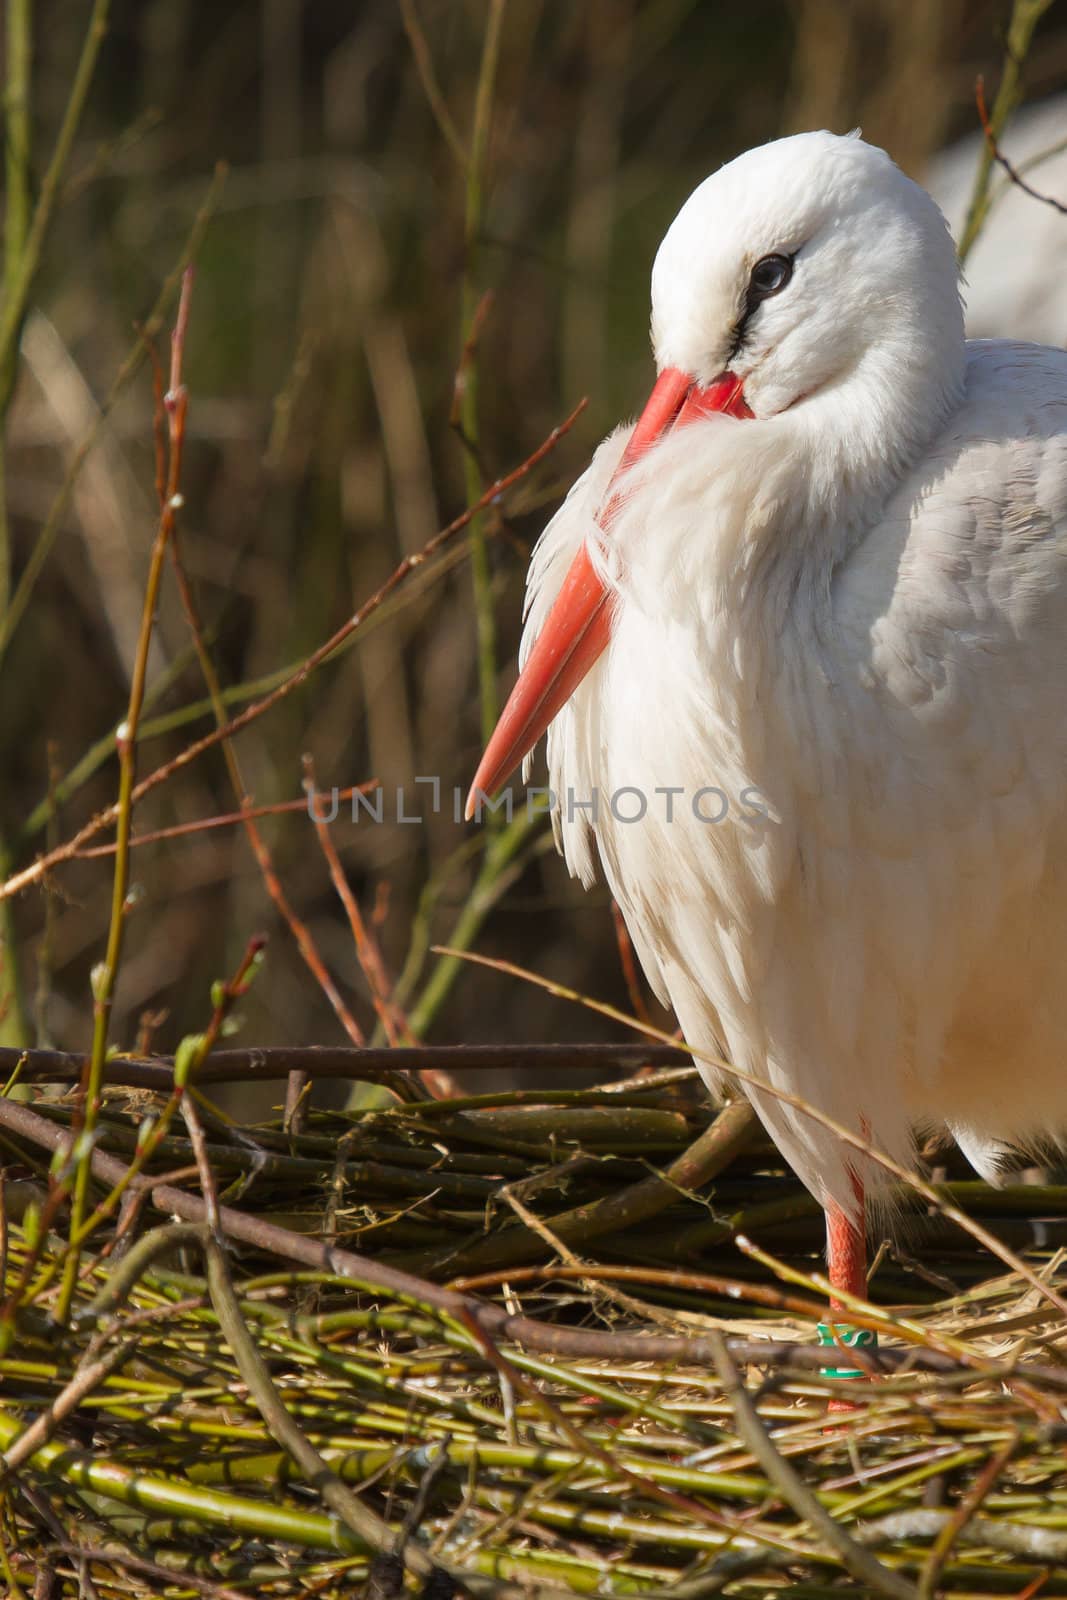 A stork is resting in its nest